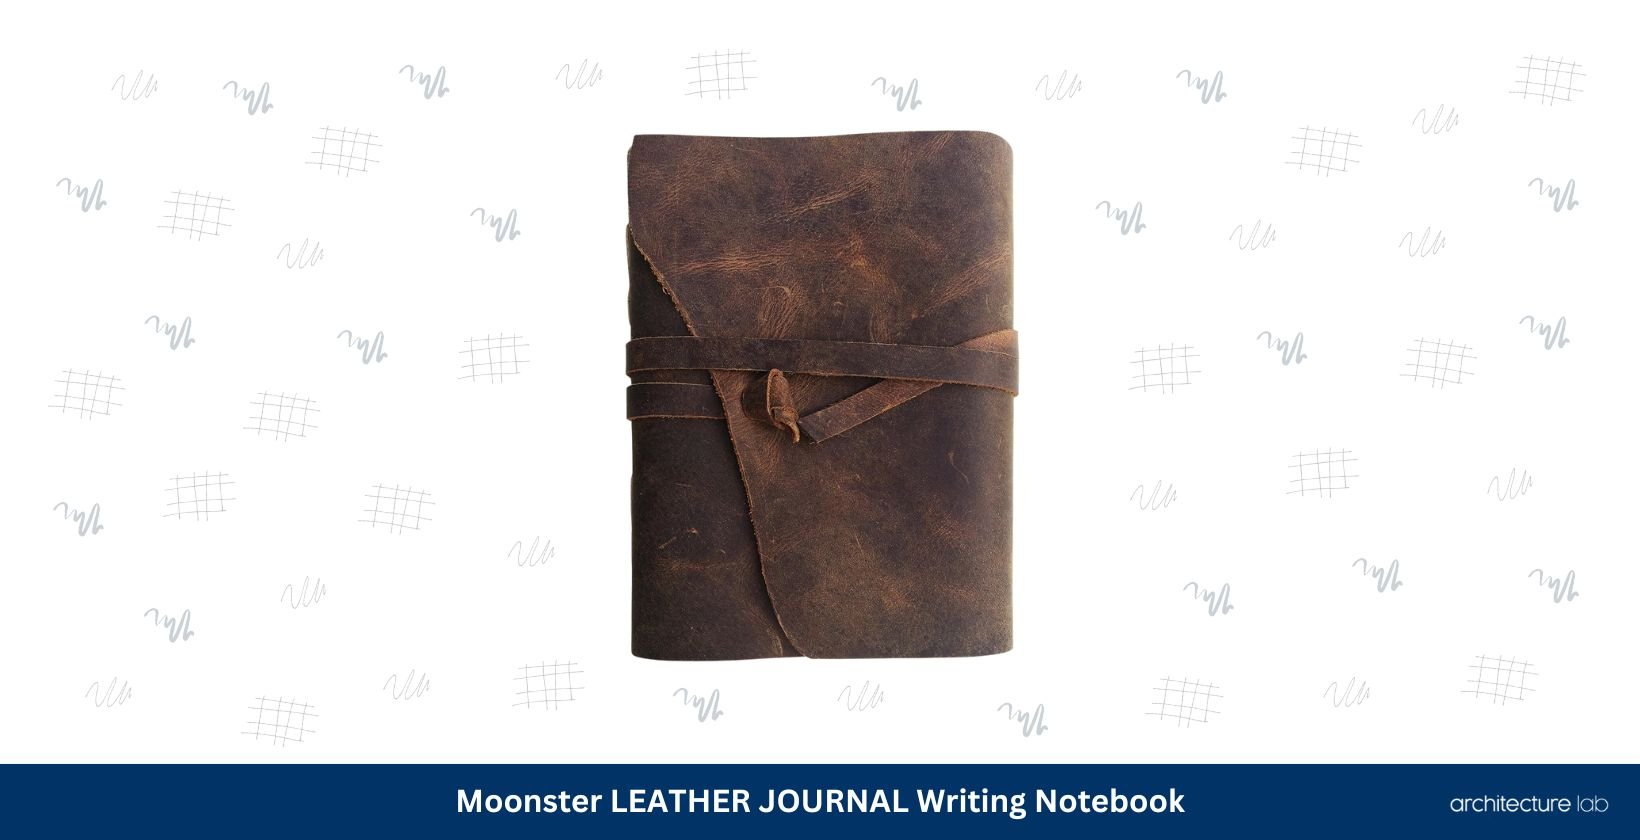 Moonster leather journal writing notebook